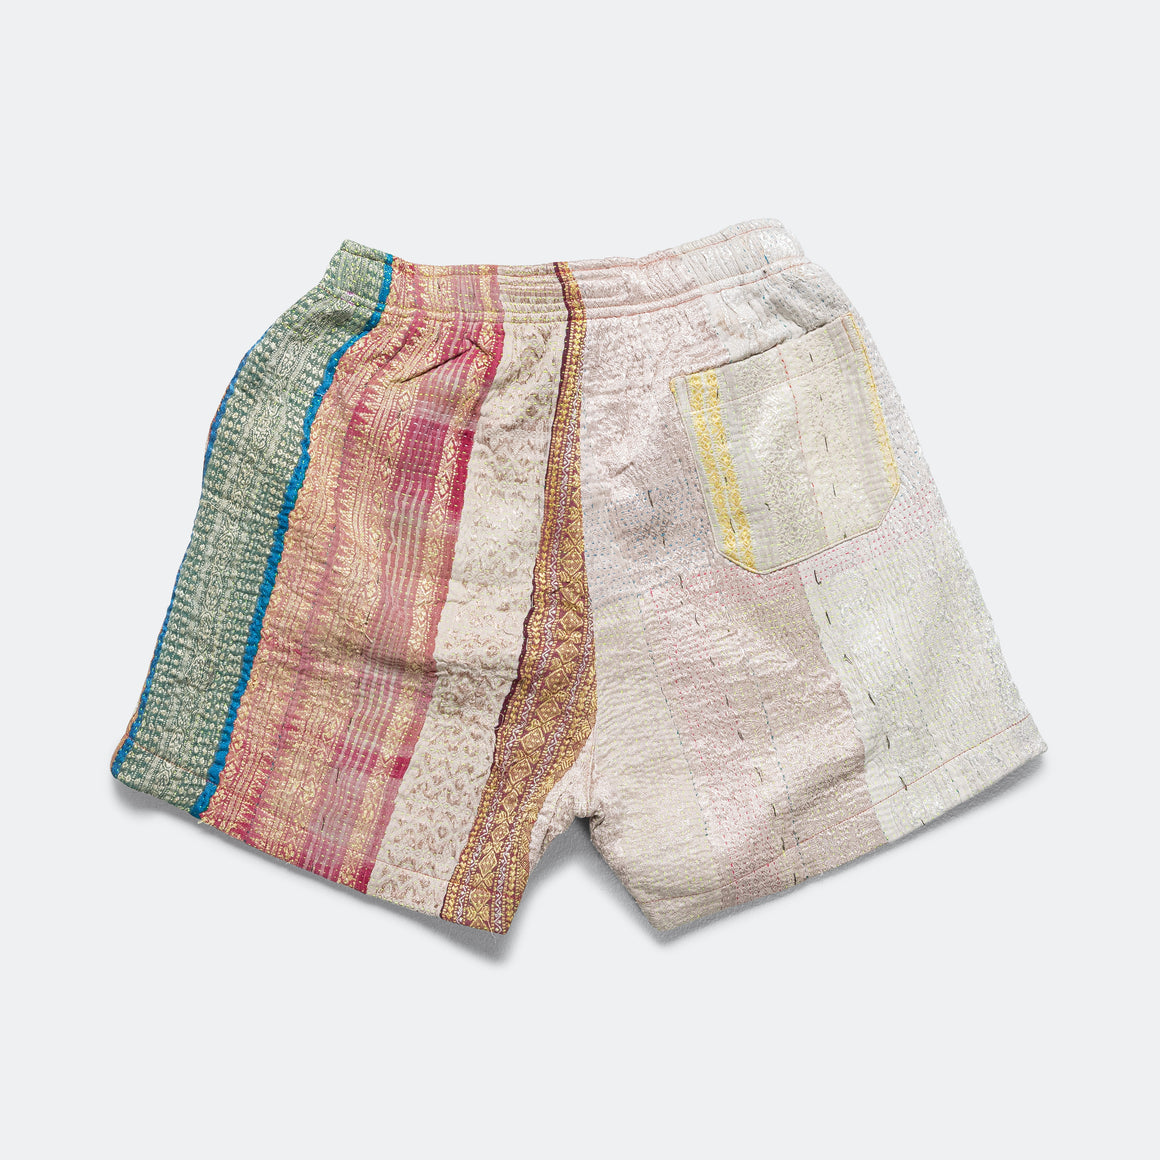 Kartik Research - One Of One Vintage Kantha Shorts - 30" - UP THERE